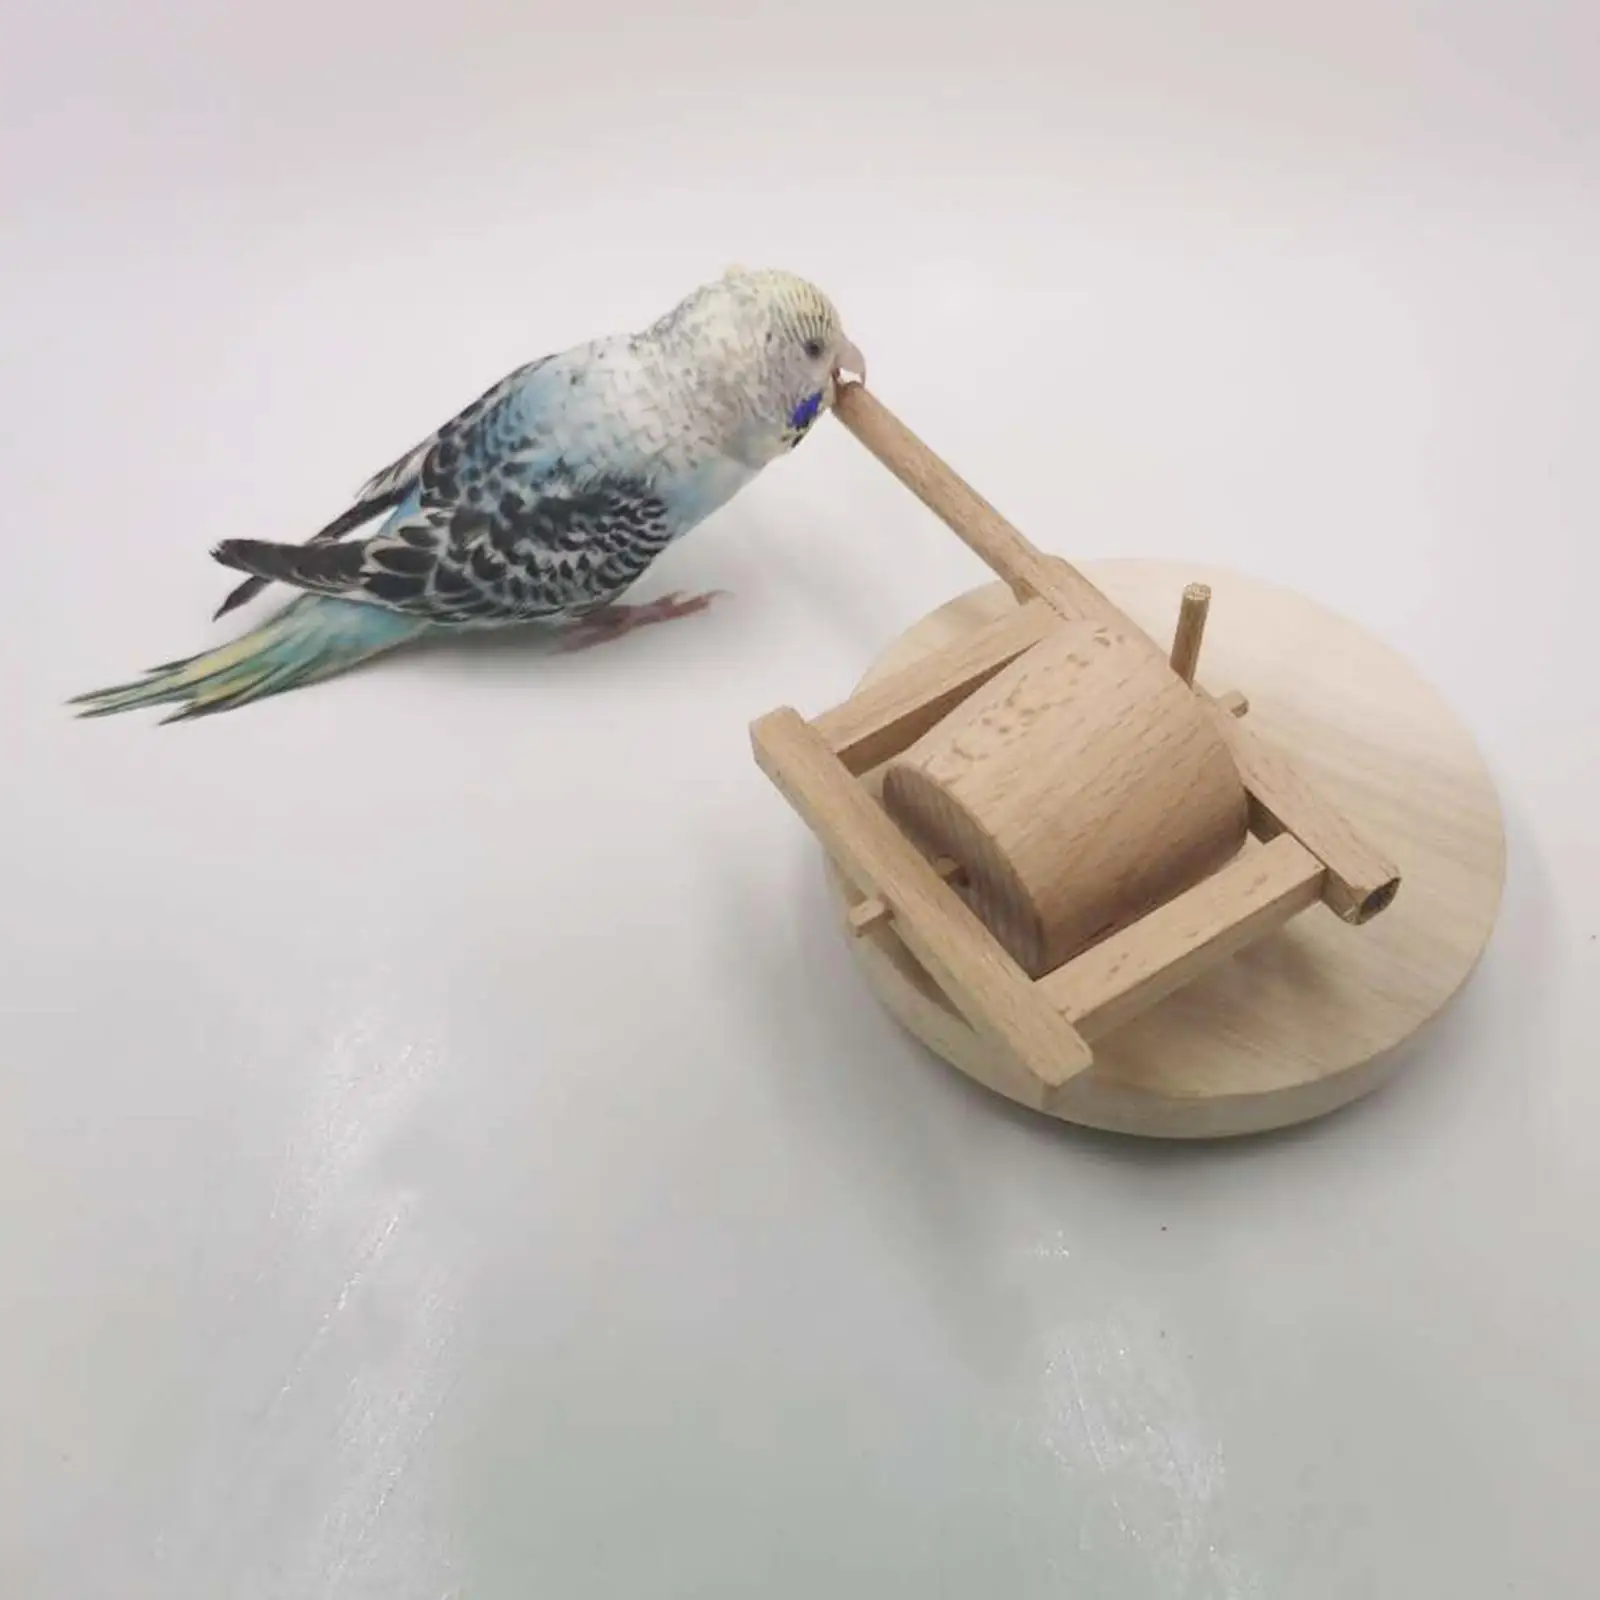 Parrot Stone Mill Toy Conures Pet Supplies Budgie African Grey Wooden Parakeets Quaker Macaw Plaything for Small Medium Birds